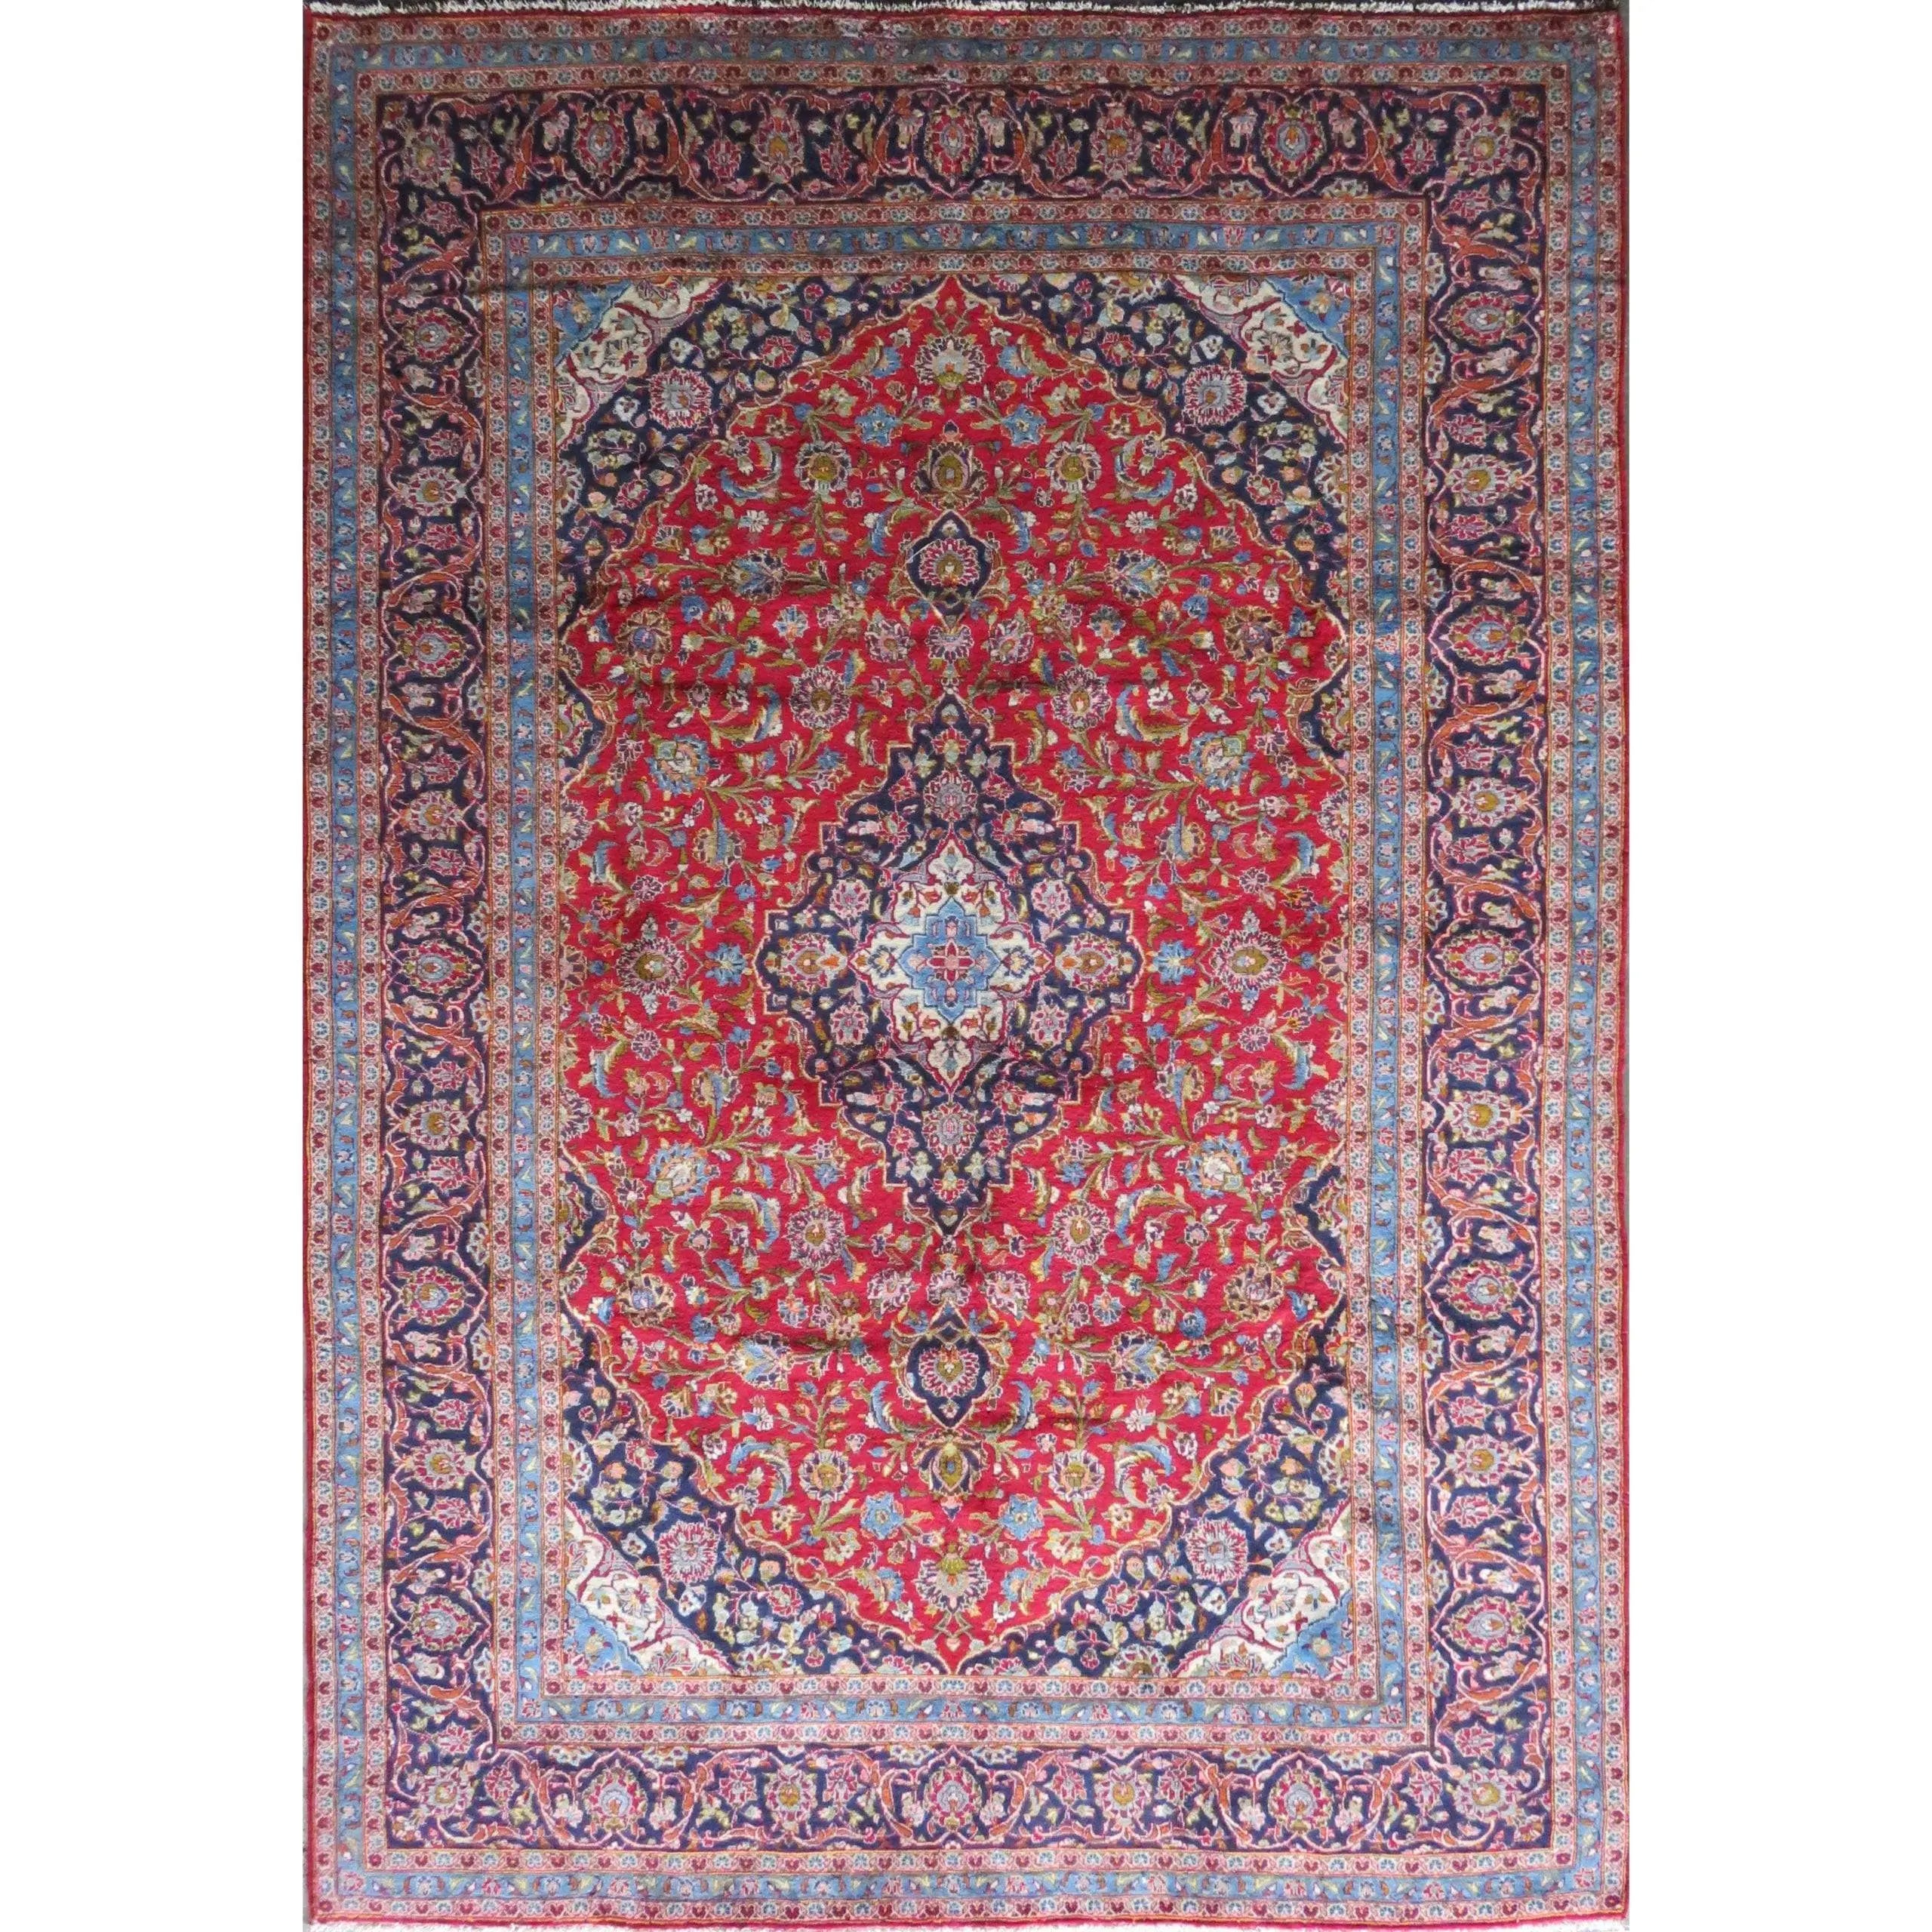 Hand-Knotted Vintage Rug 11'10" x 8'3"